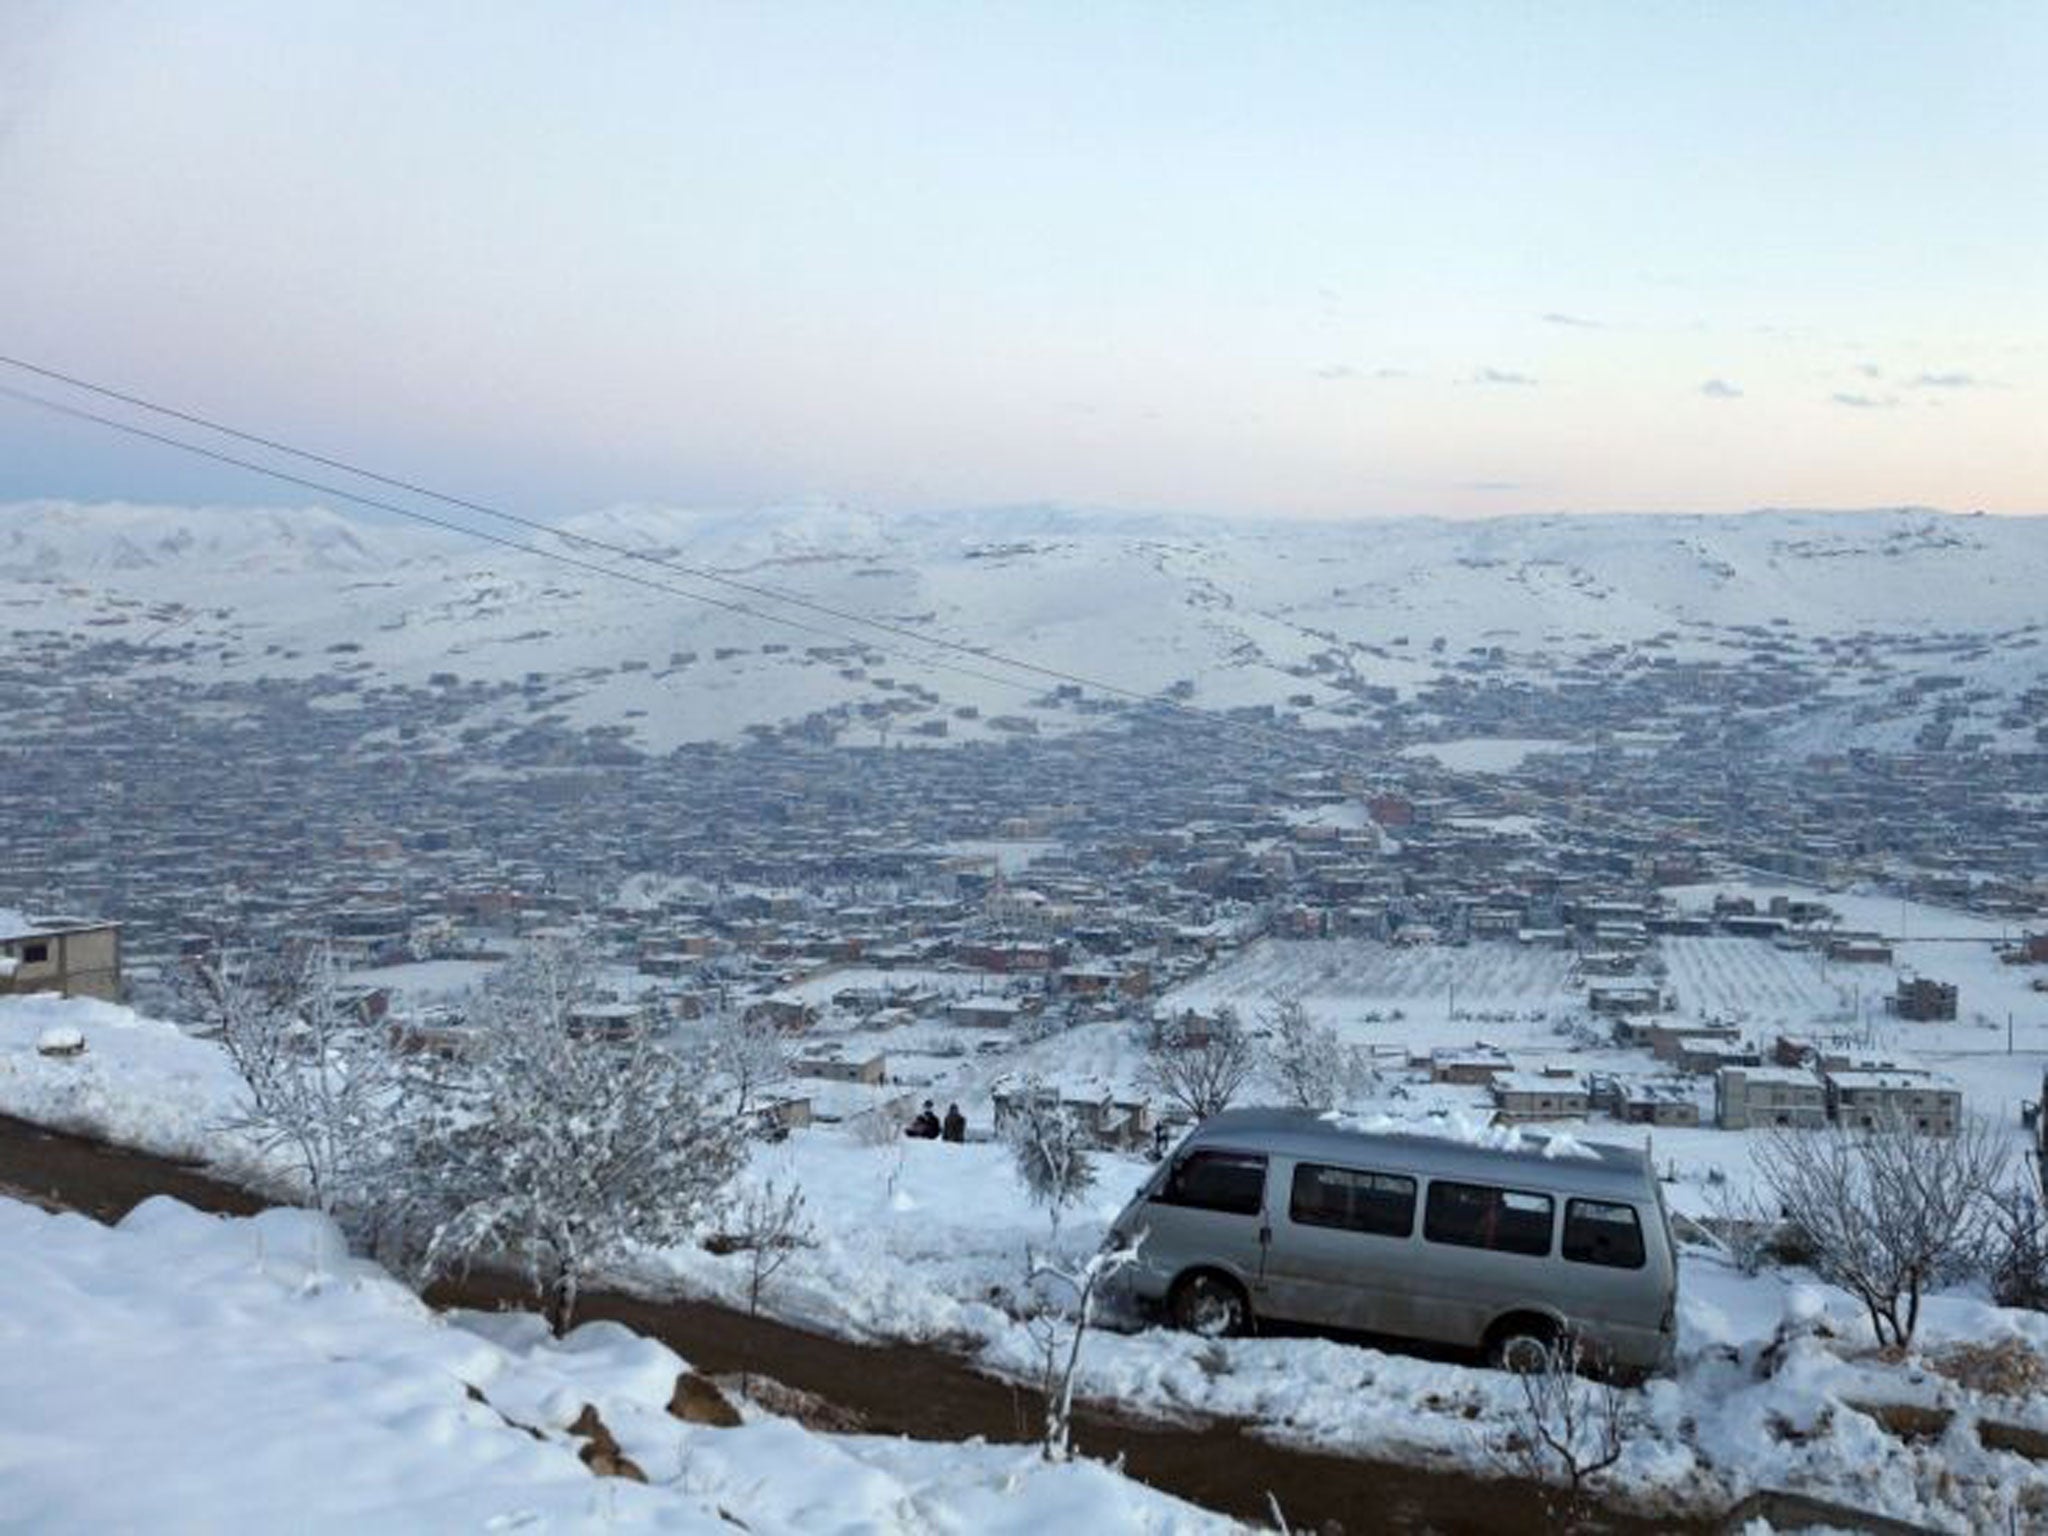 A general view of the town of Arsal in the Lebanese Bekaa valley.